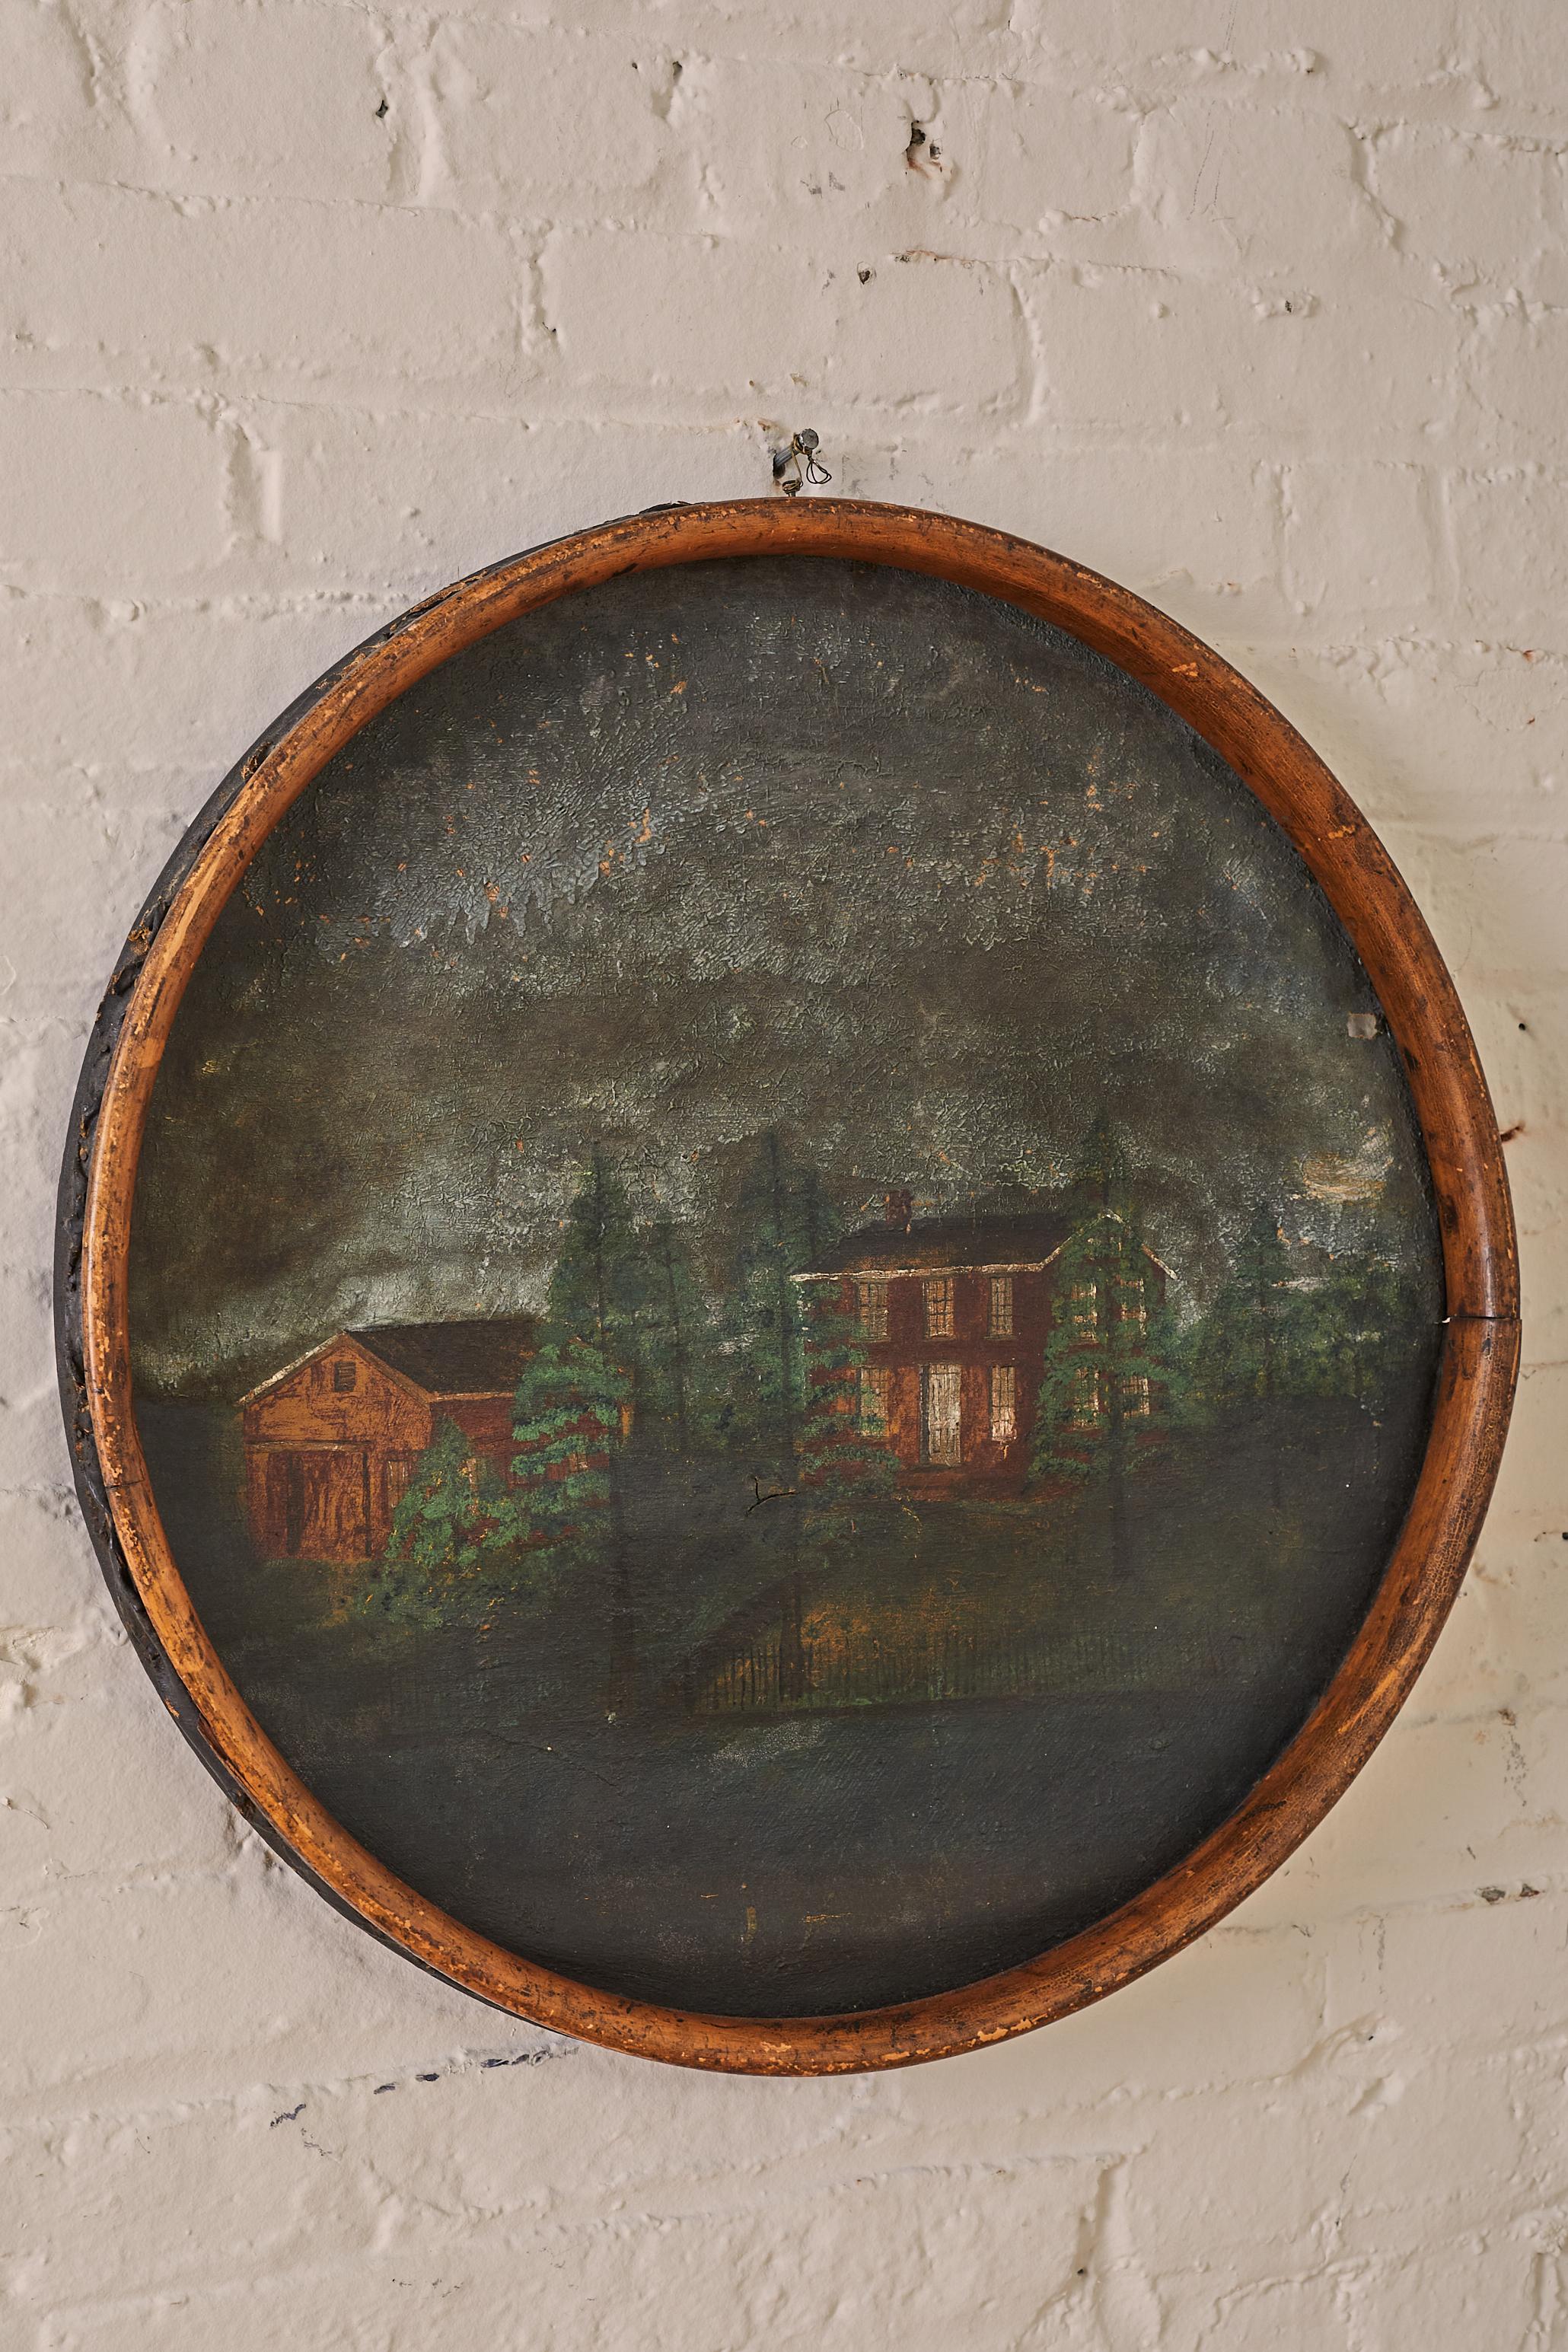 House Landscape on Oil Cloth. This artwork depicts a house, garage, fence, all nestled amidst trees. The canvas is stretched over a wooden bicycle rim.

